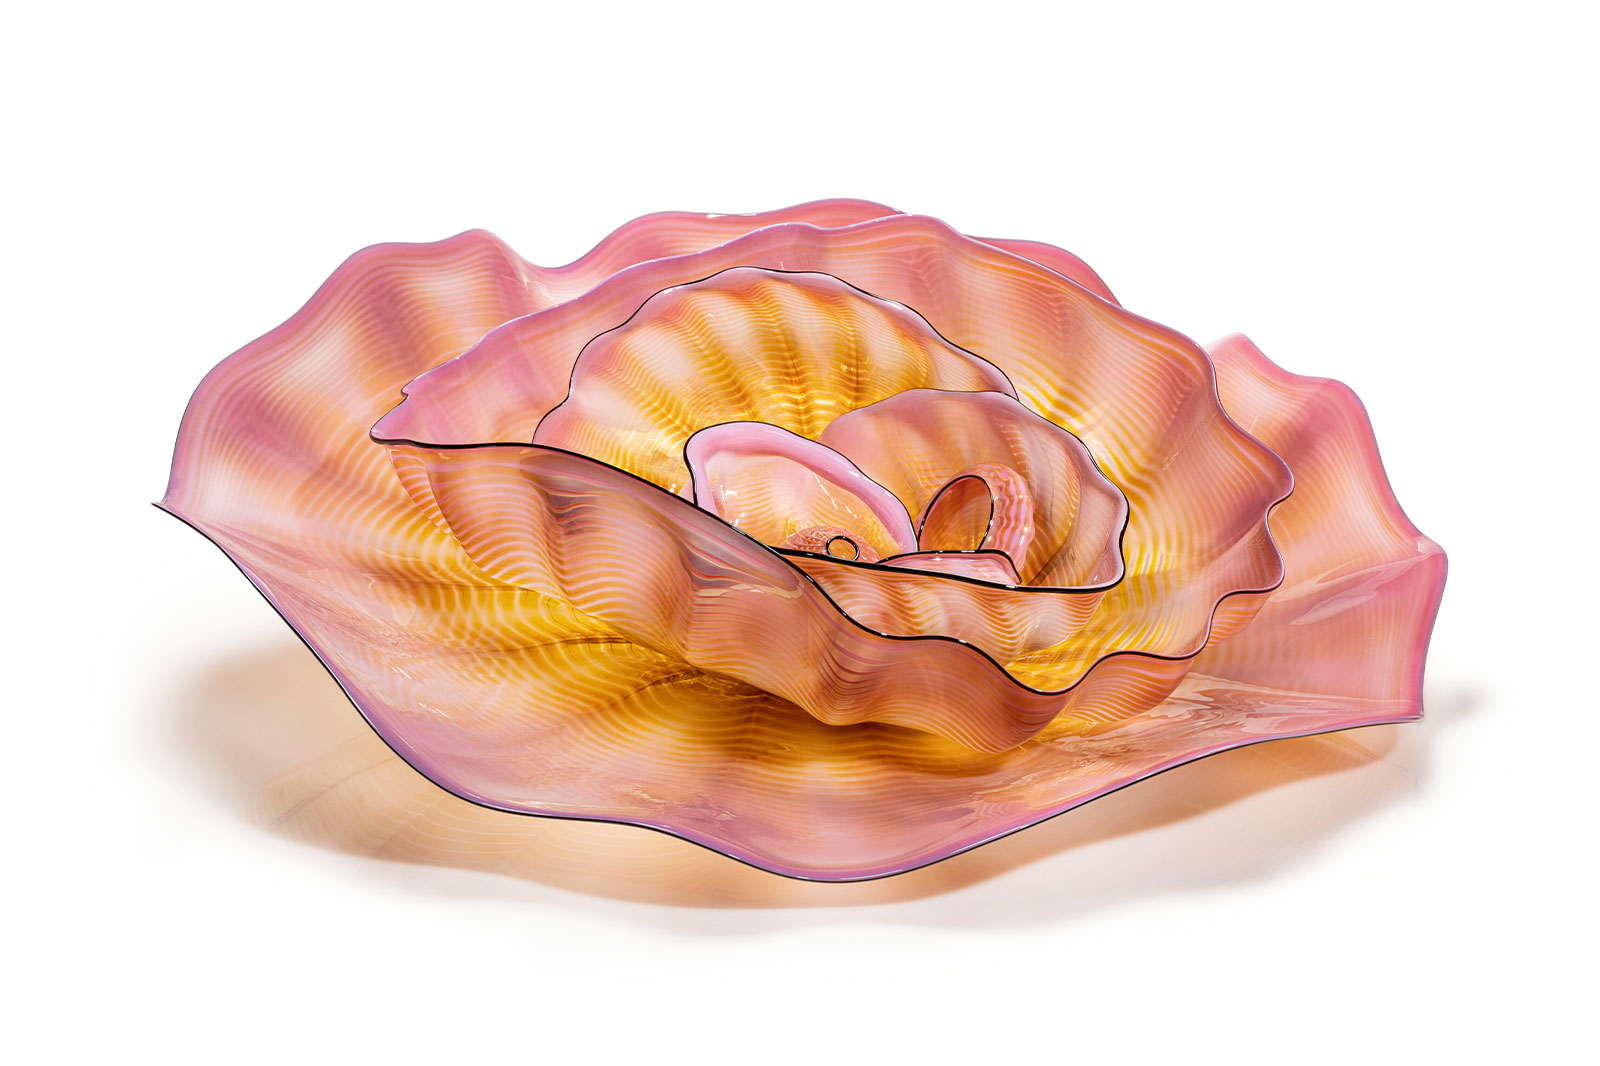 Cherry Blossom Seaform Set with Black Lip Wraps, 1998, by Dale Chihuly